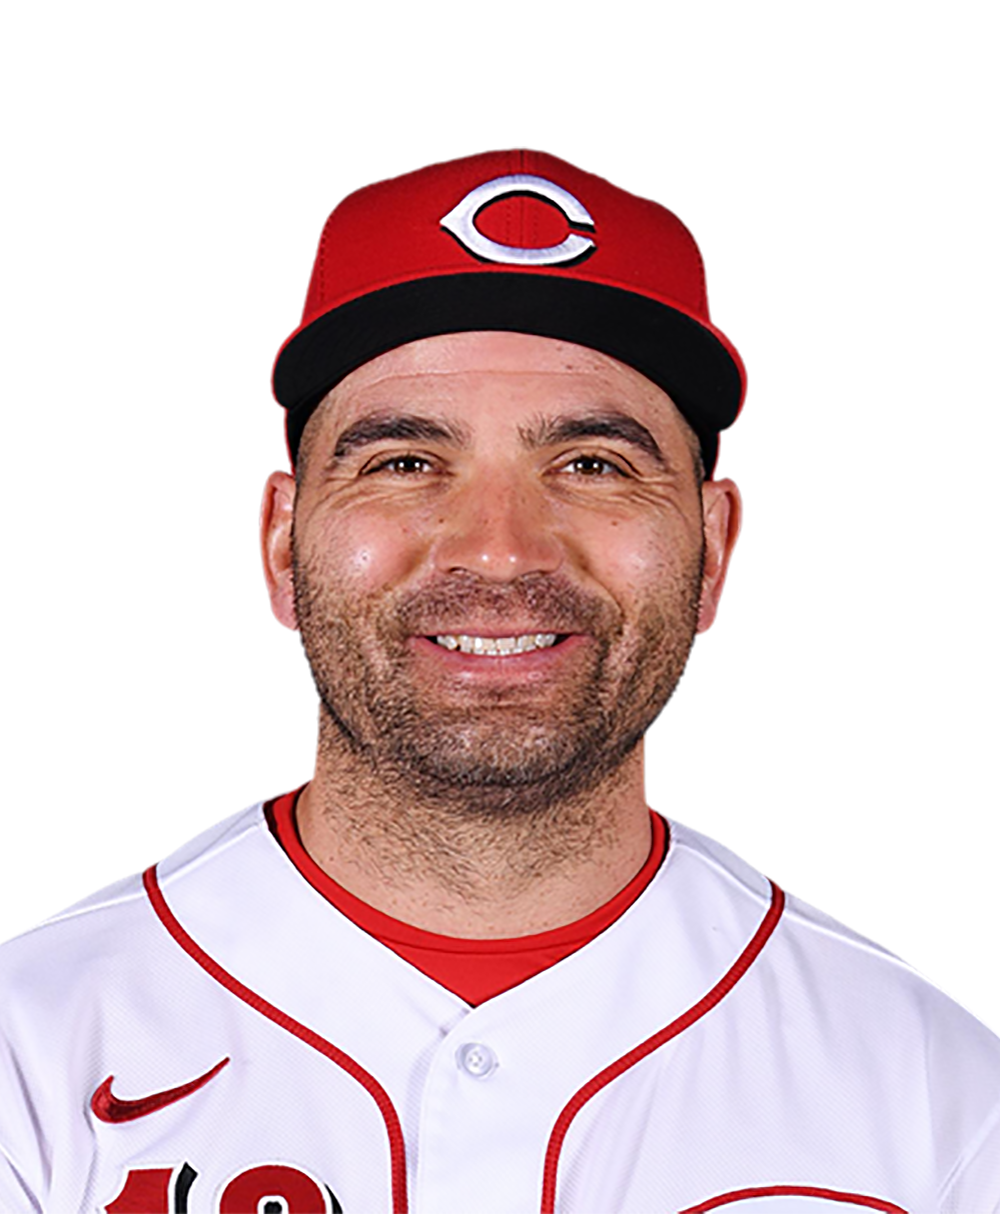 How Joey Votto of the Reds Became a Social Media Star - The New